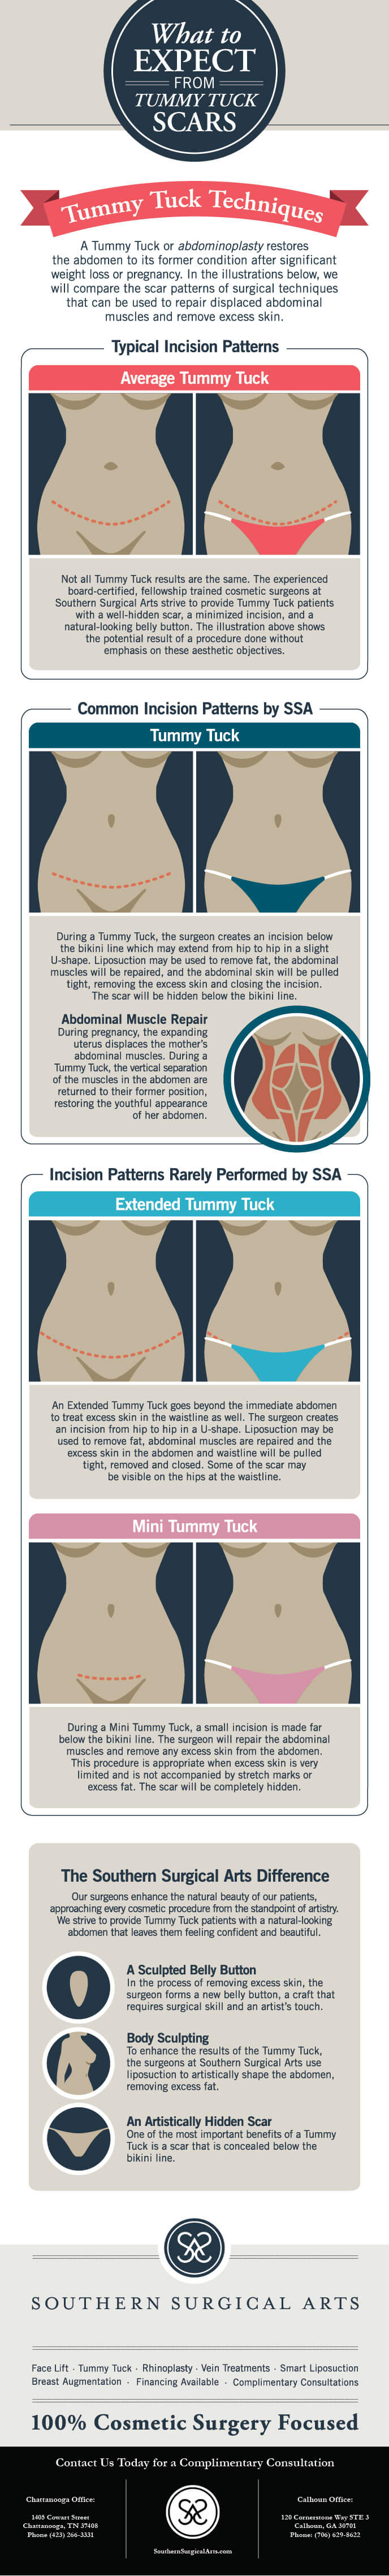 Unveiling Tummy Tuck Scars: What to Expect and Where - Reviews &  Appointment - 2024